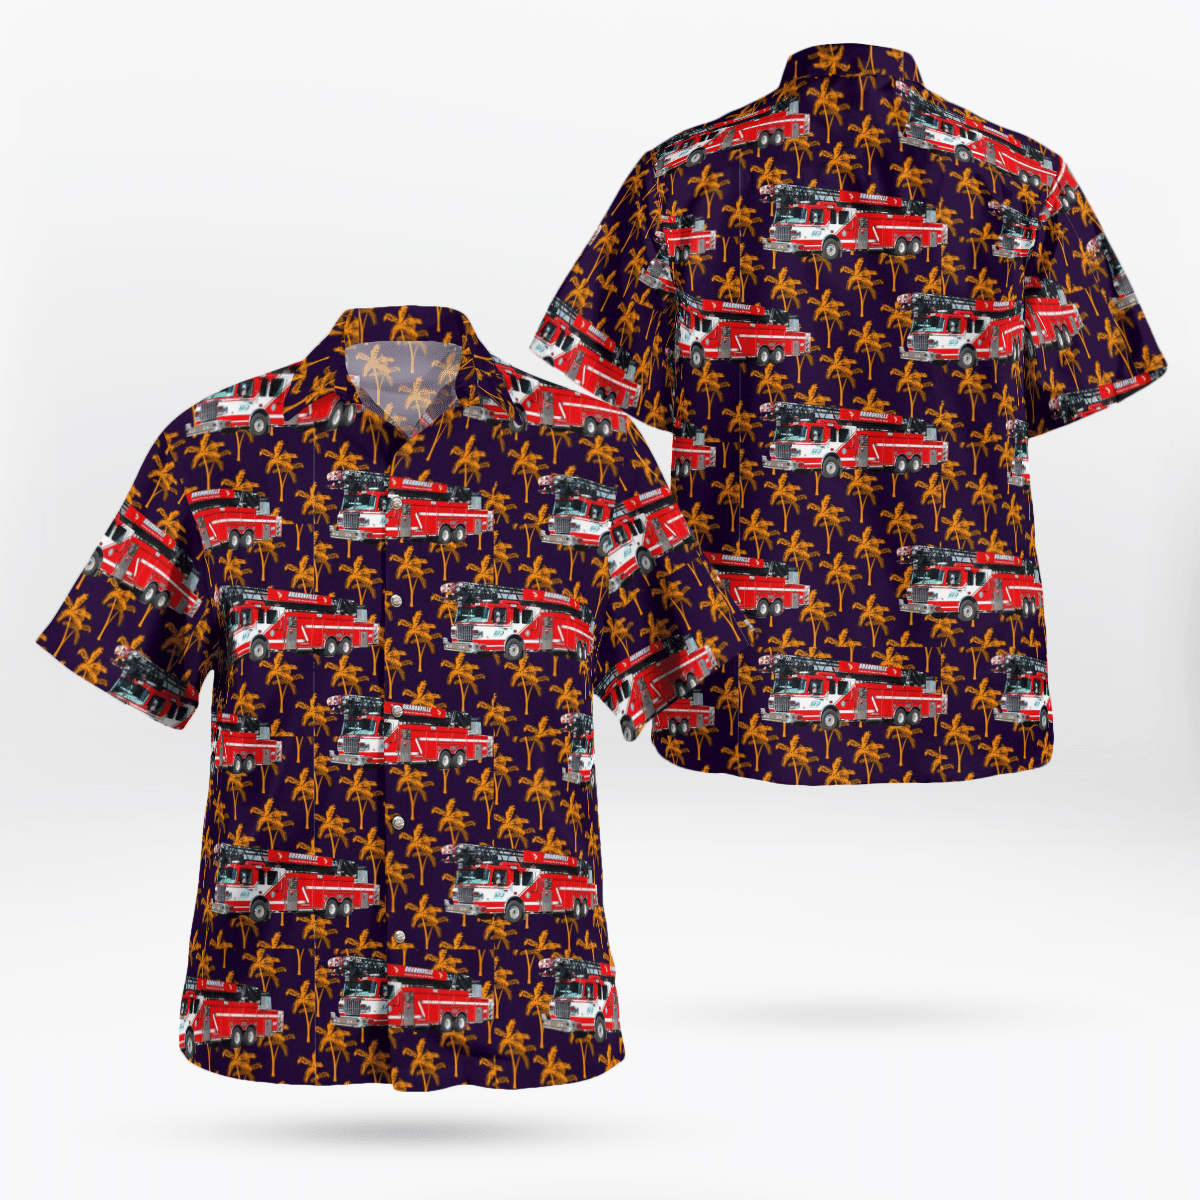 If you are in need of a new summertime look, pick up this Hawaiian shirt 150